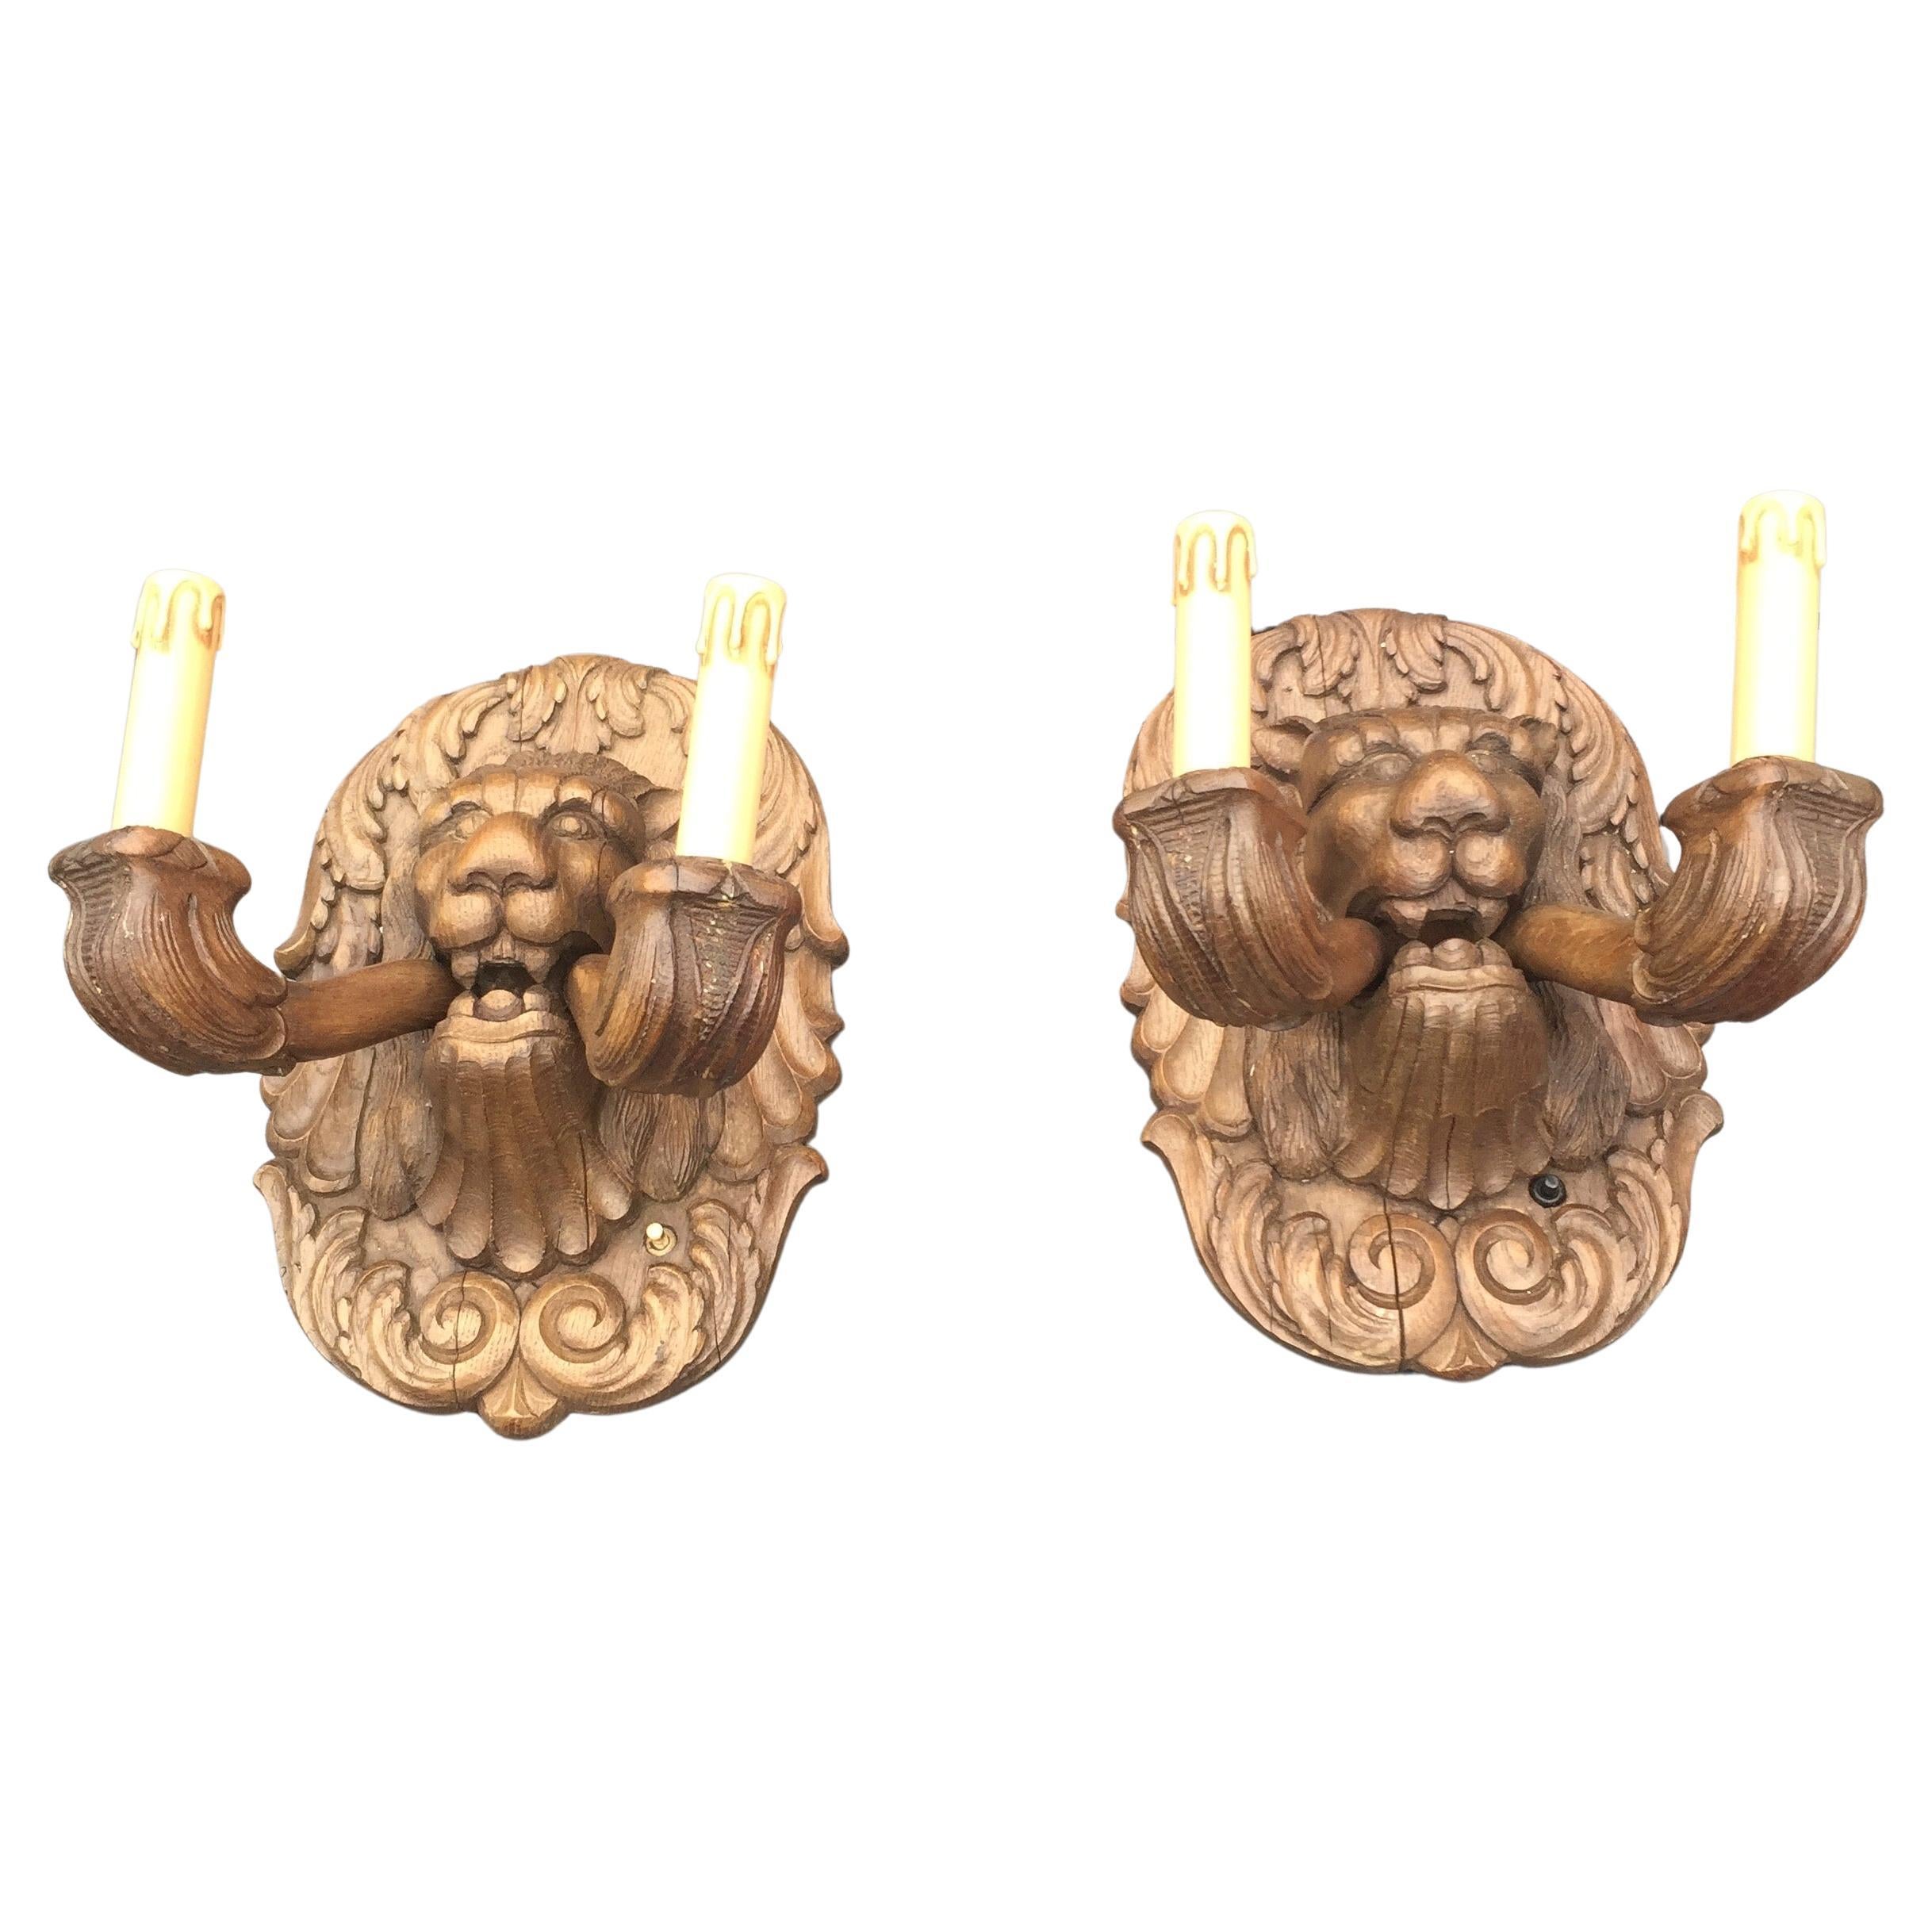 Unique and Wonderful Pair Large and Carved Wood Lion Head Sculpture Wall Sconces